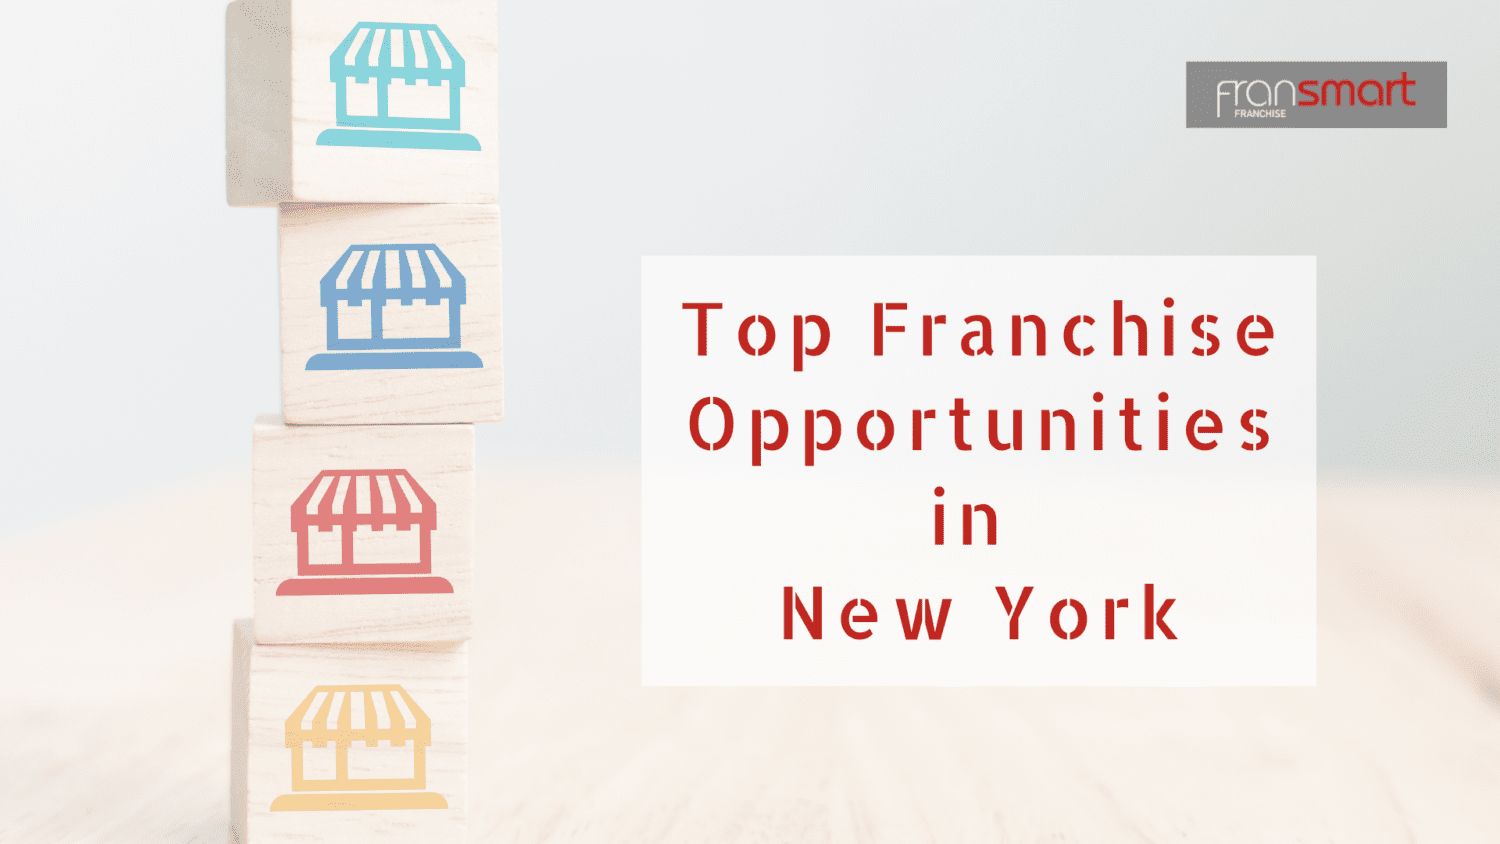 Top Franchise Opportunities in New York